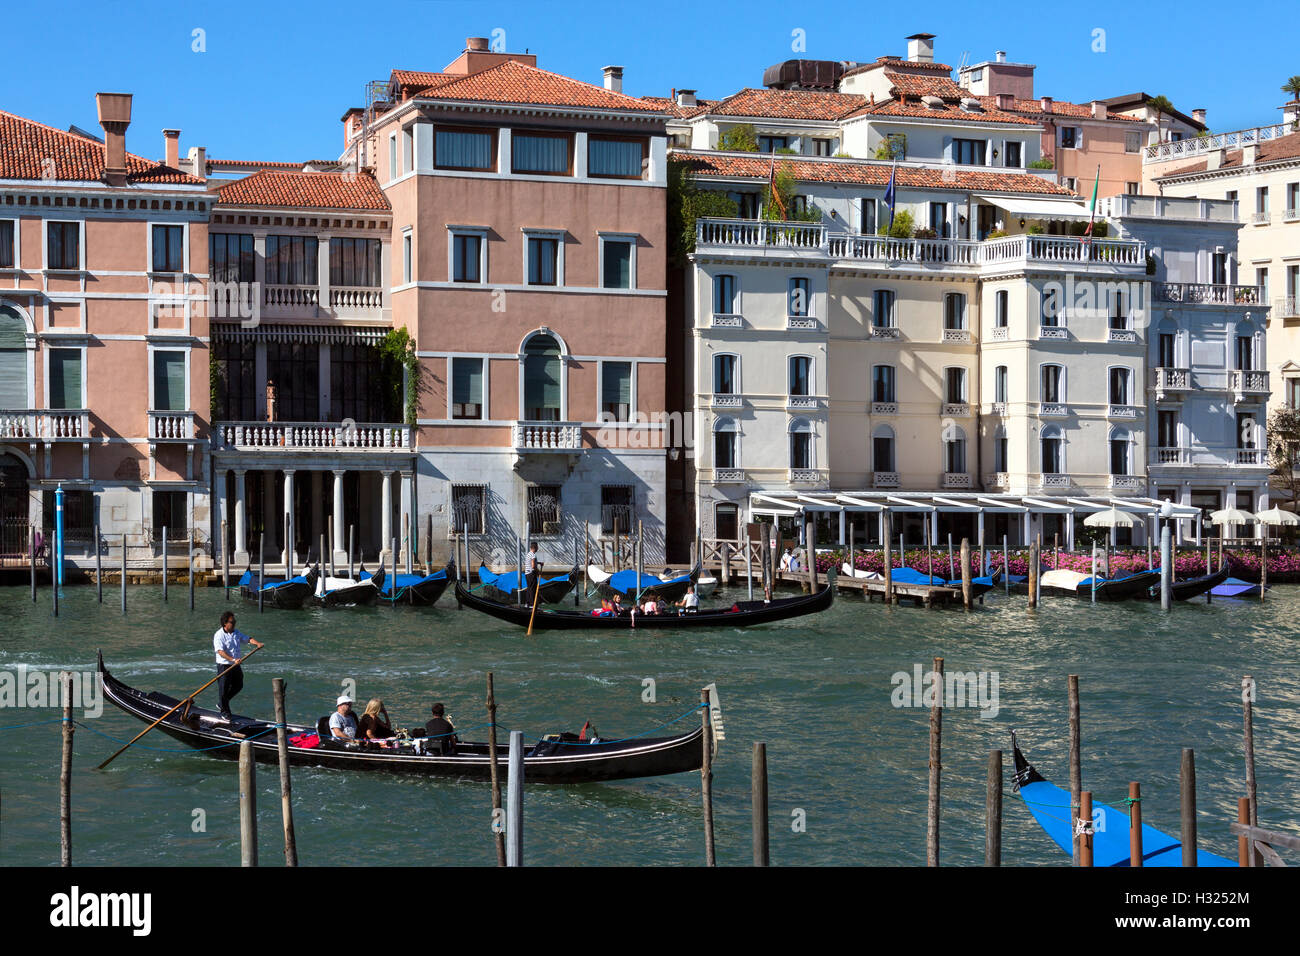 The Grand Canal in the city of Venice in northern Italy. Stock Photo